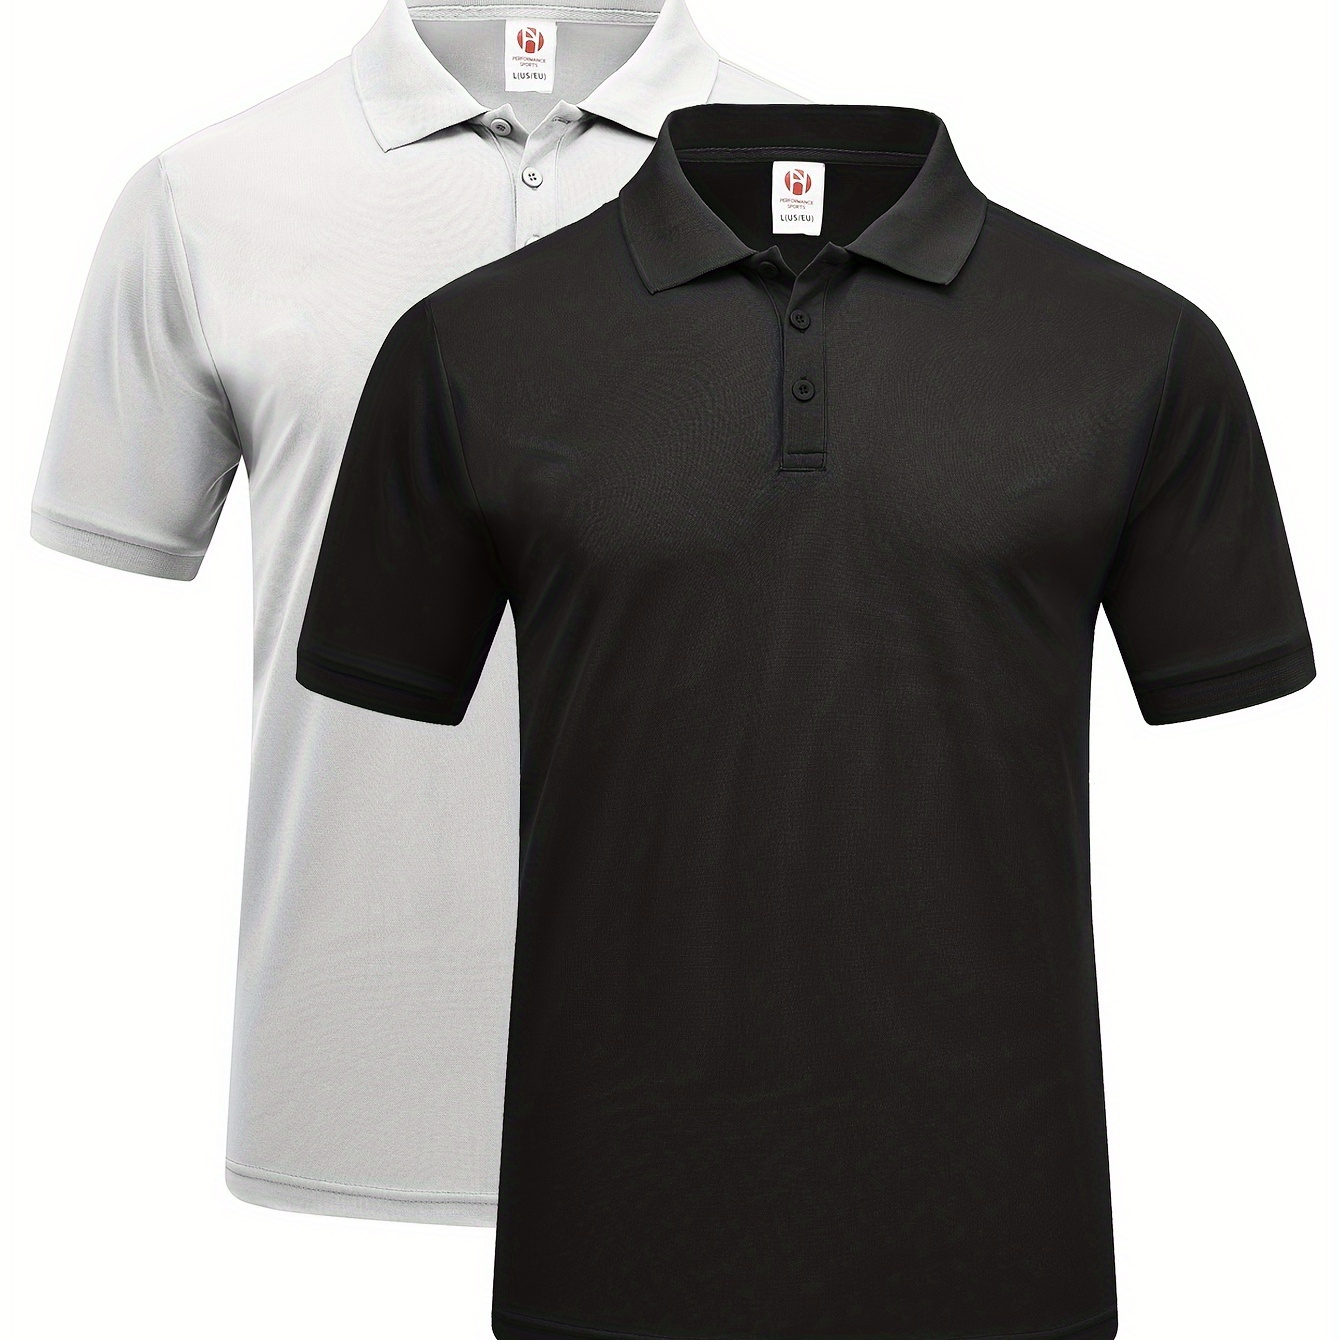 

Men's Quick Dry Polo Shirts Polyester Casual Collared Tennis Golf Shirts, Moisture-wicking, Short Sleeve Sports Shirts 2 Pack